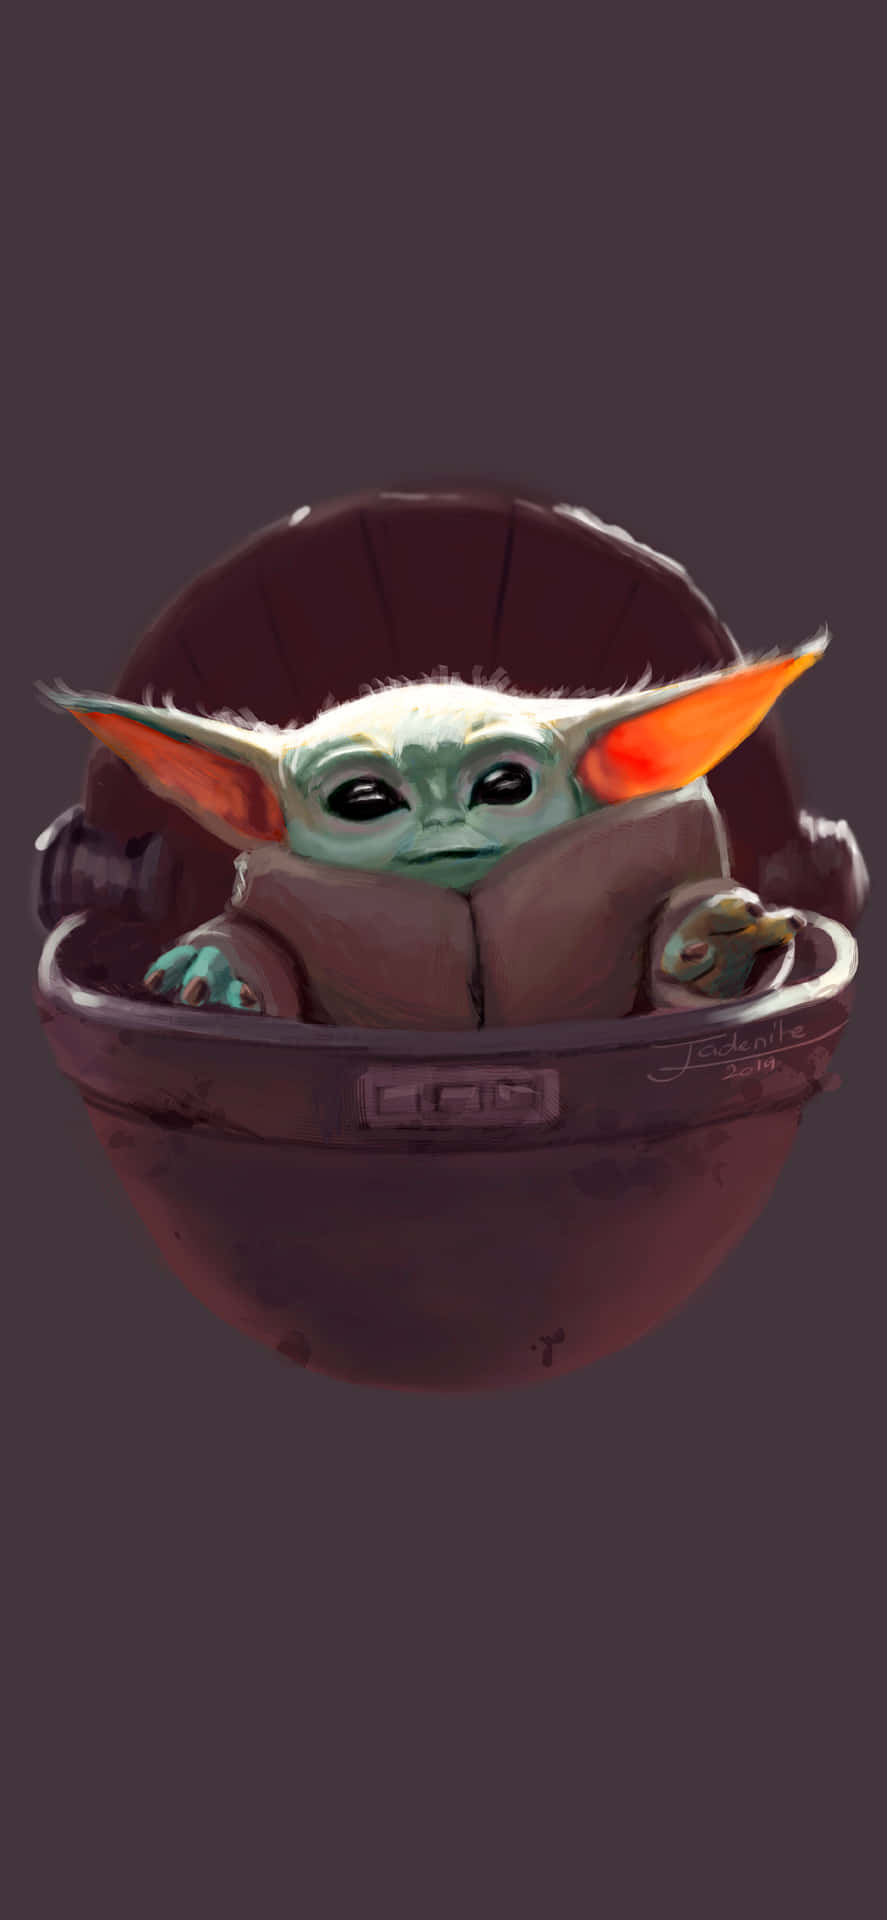 The lovable Baby Yoda rocking a new smartphone! Wallpaper